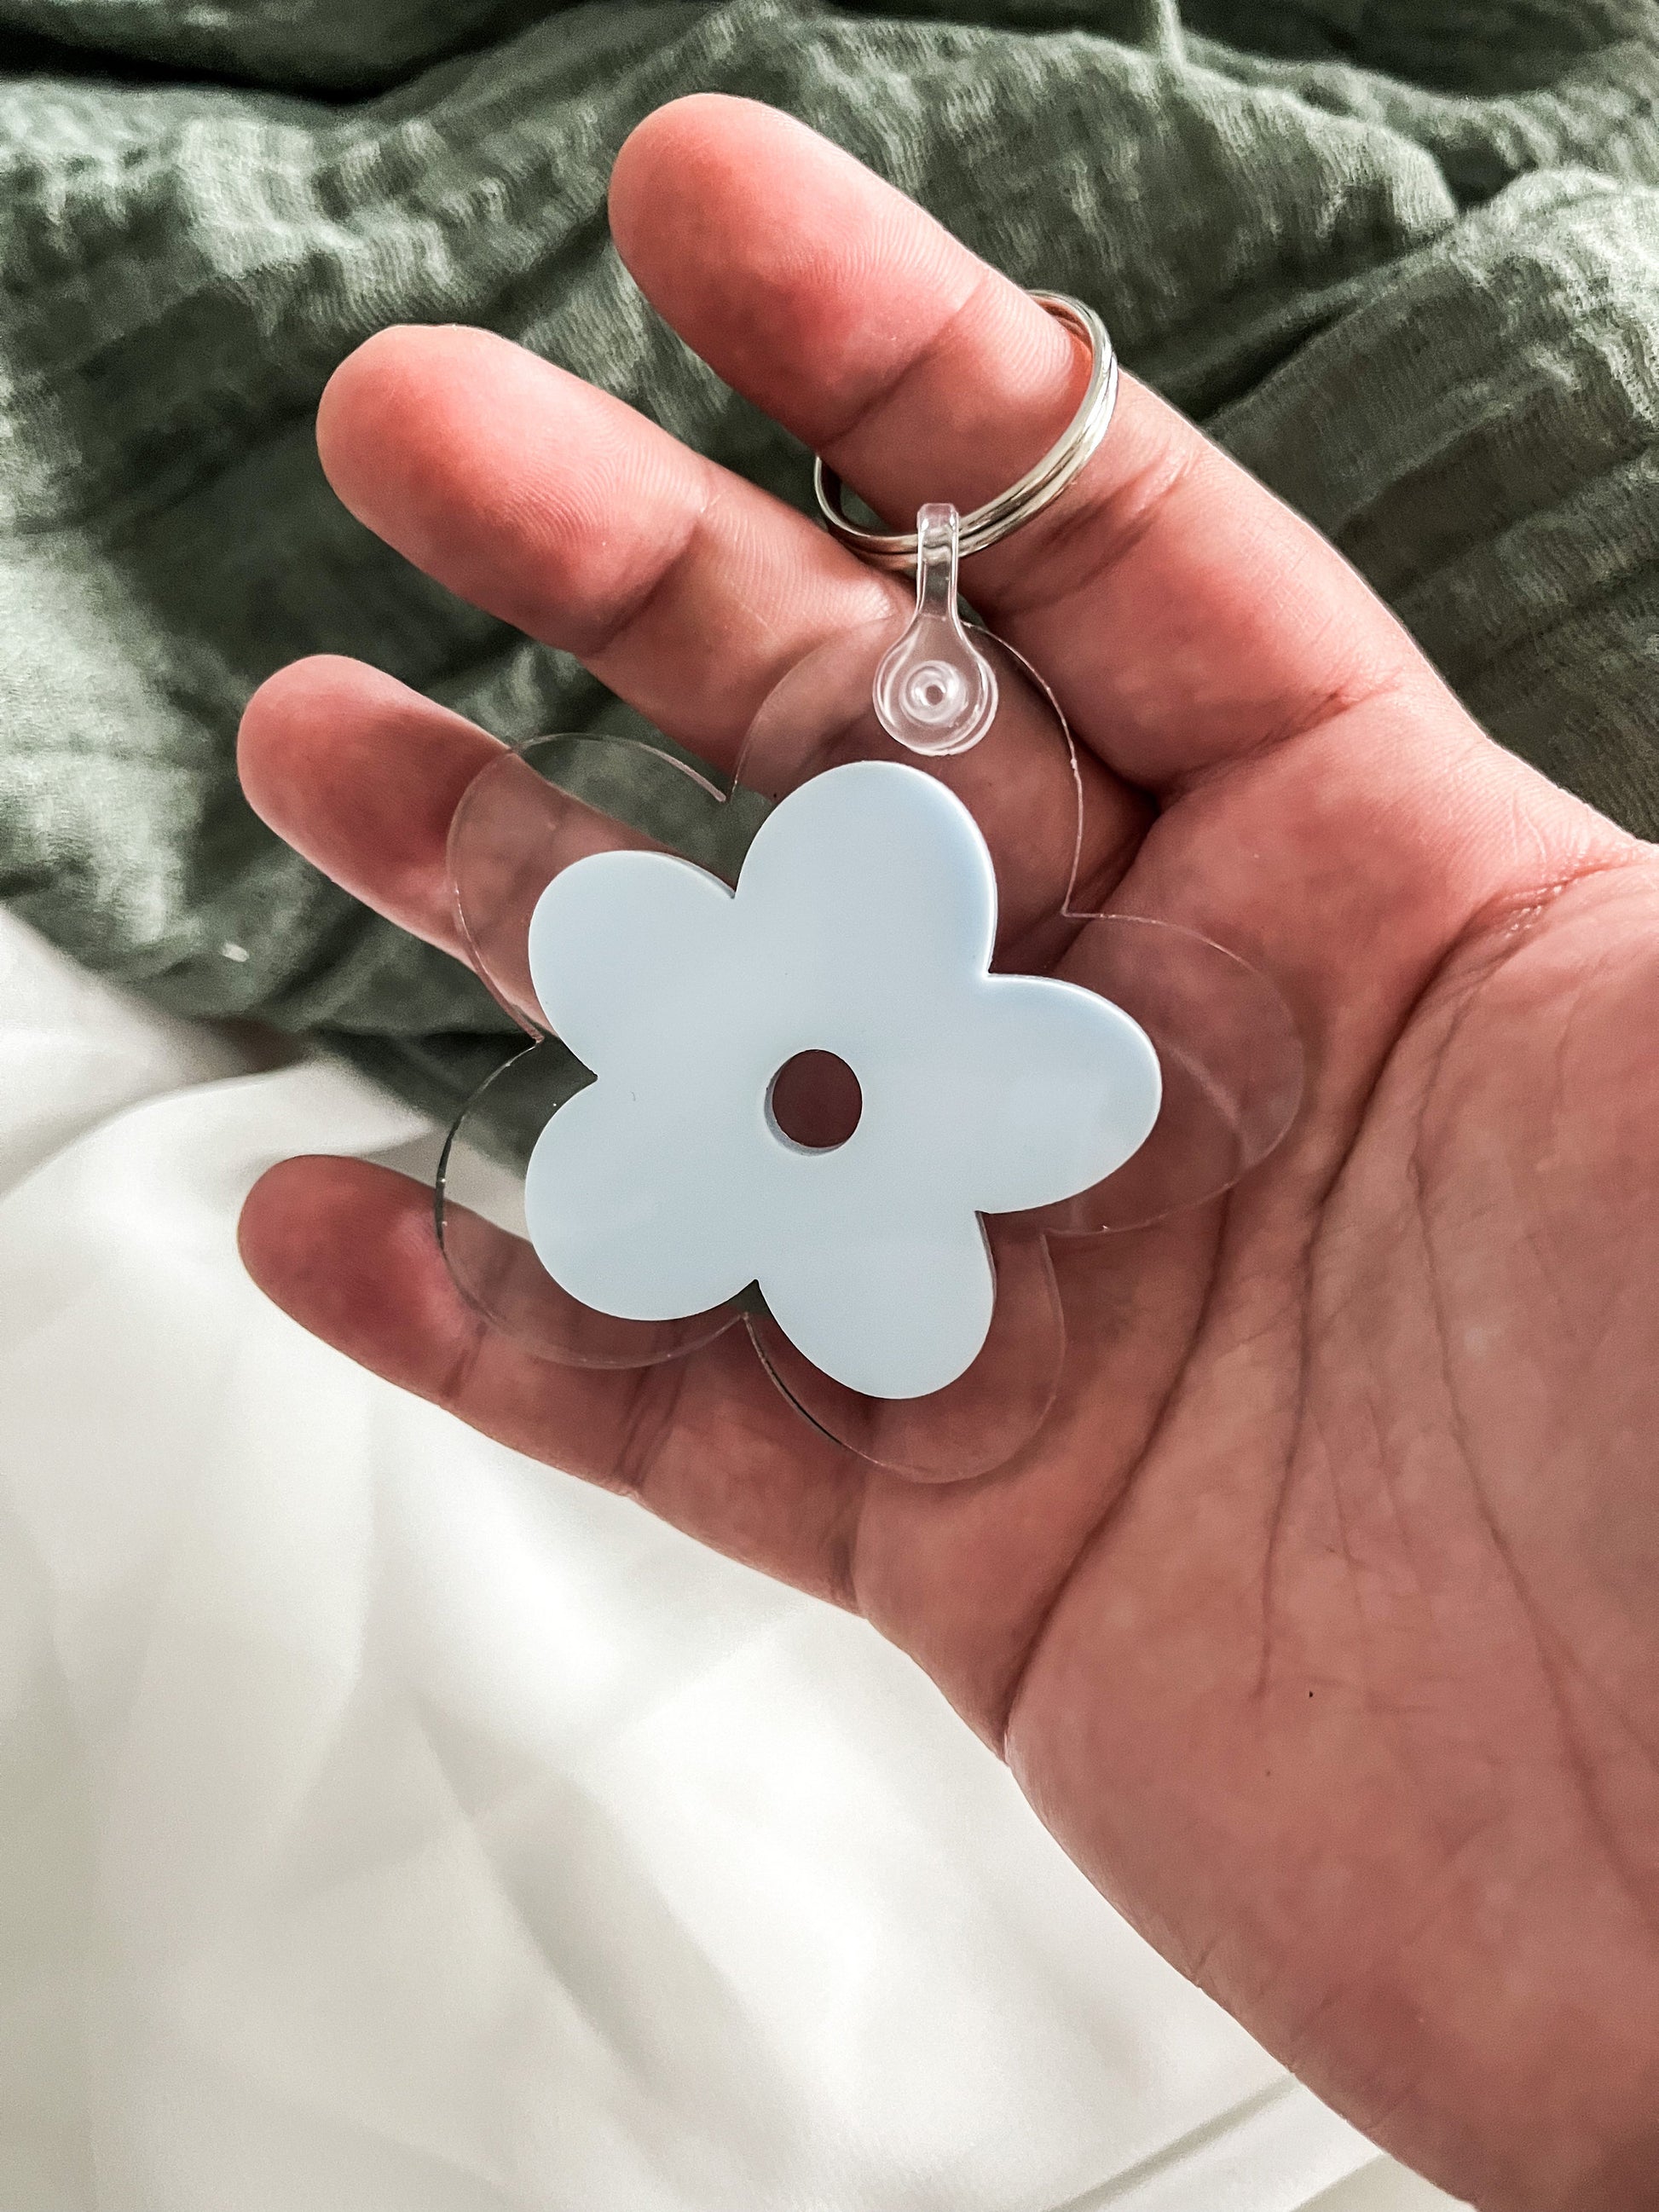 Retro Flower Keychain, Daisy Floral Keychain, Colorful Keychain, Acrylic Bag Tag, Mother's Day Gift, Customized Gift for Mom